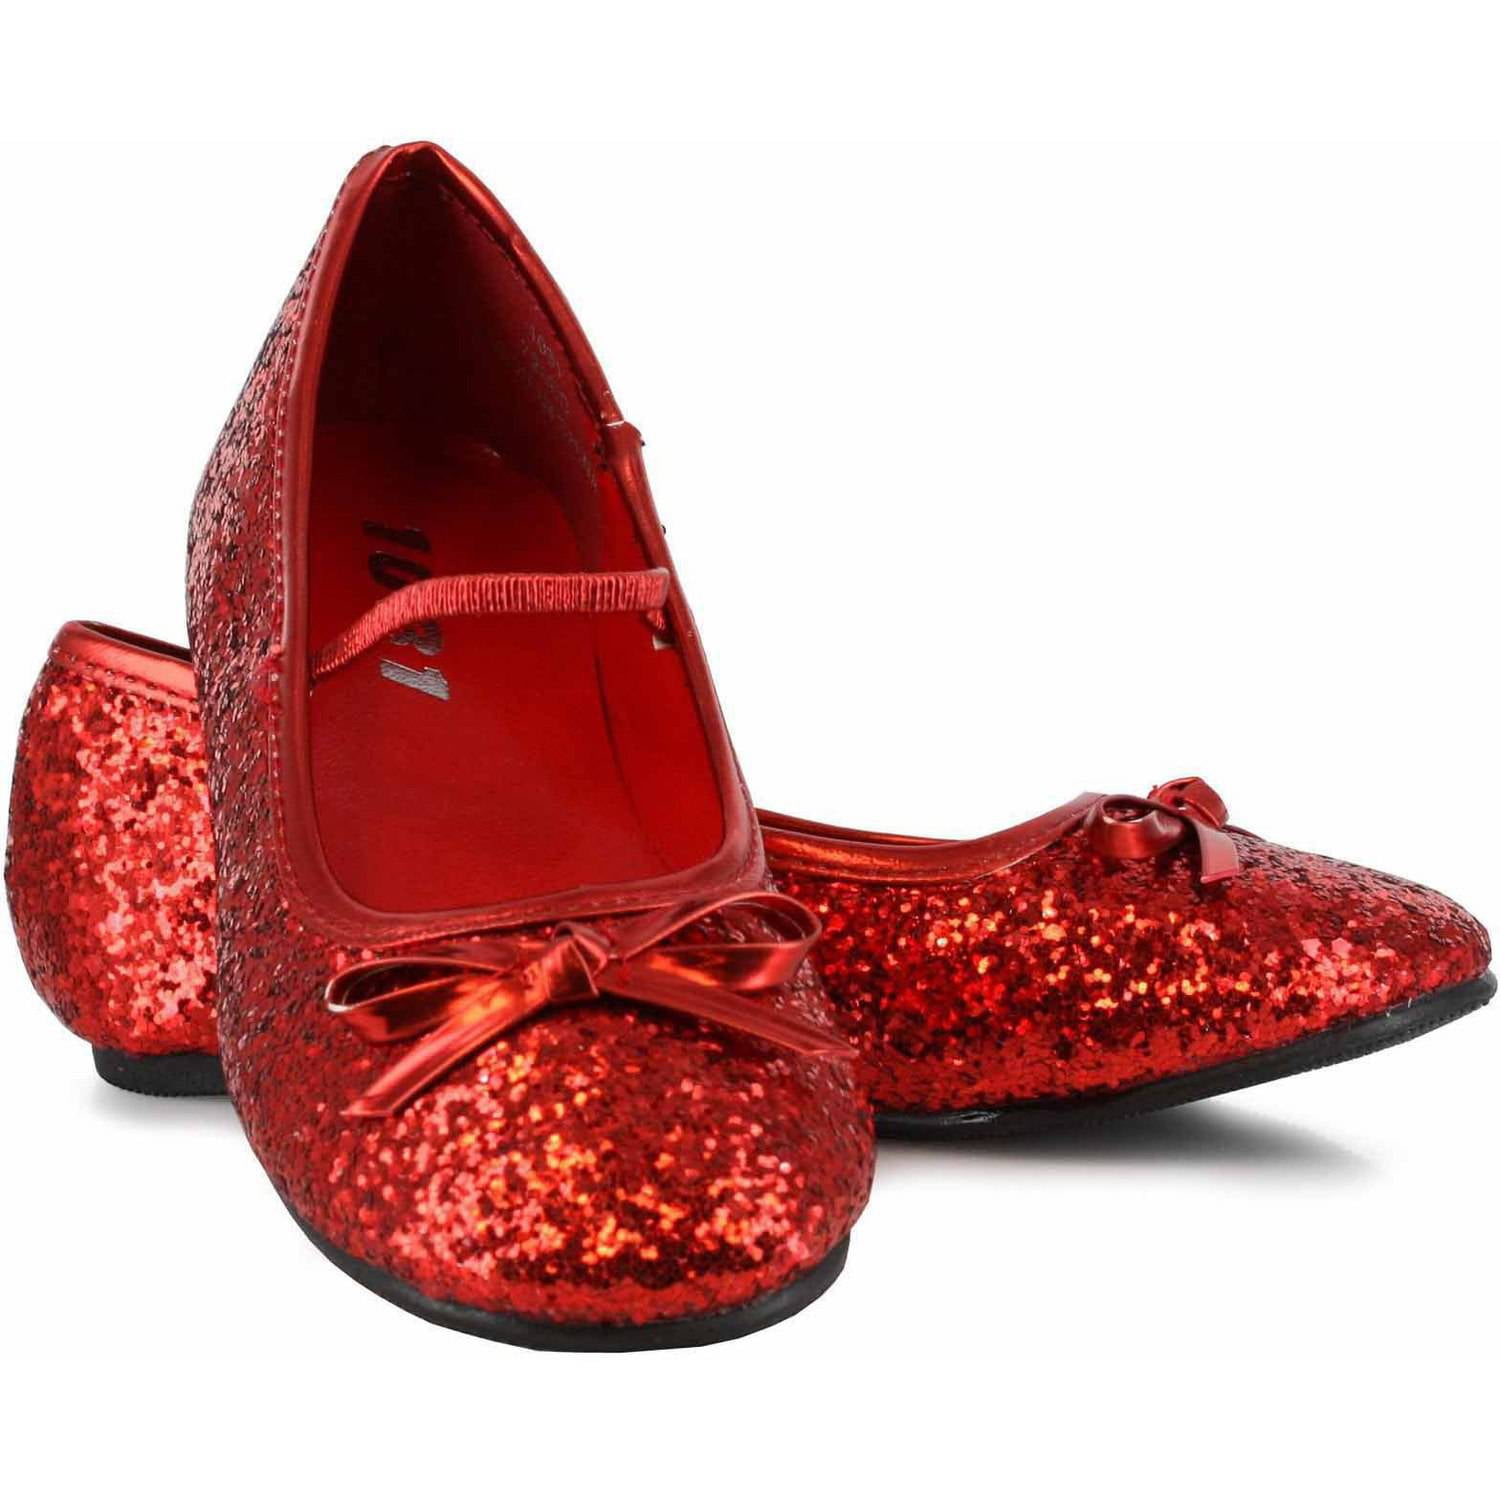 girls red sparkle shoes